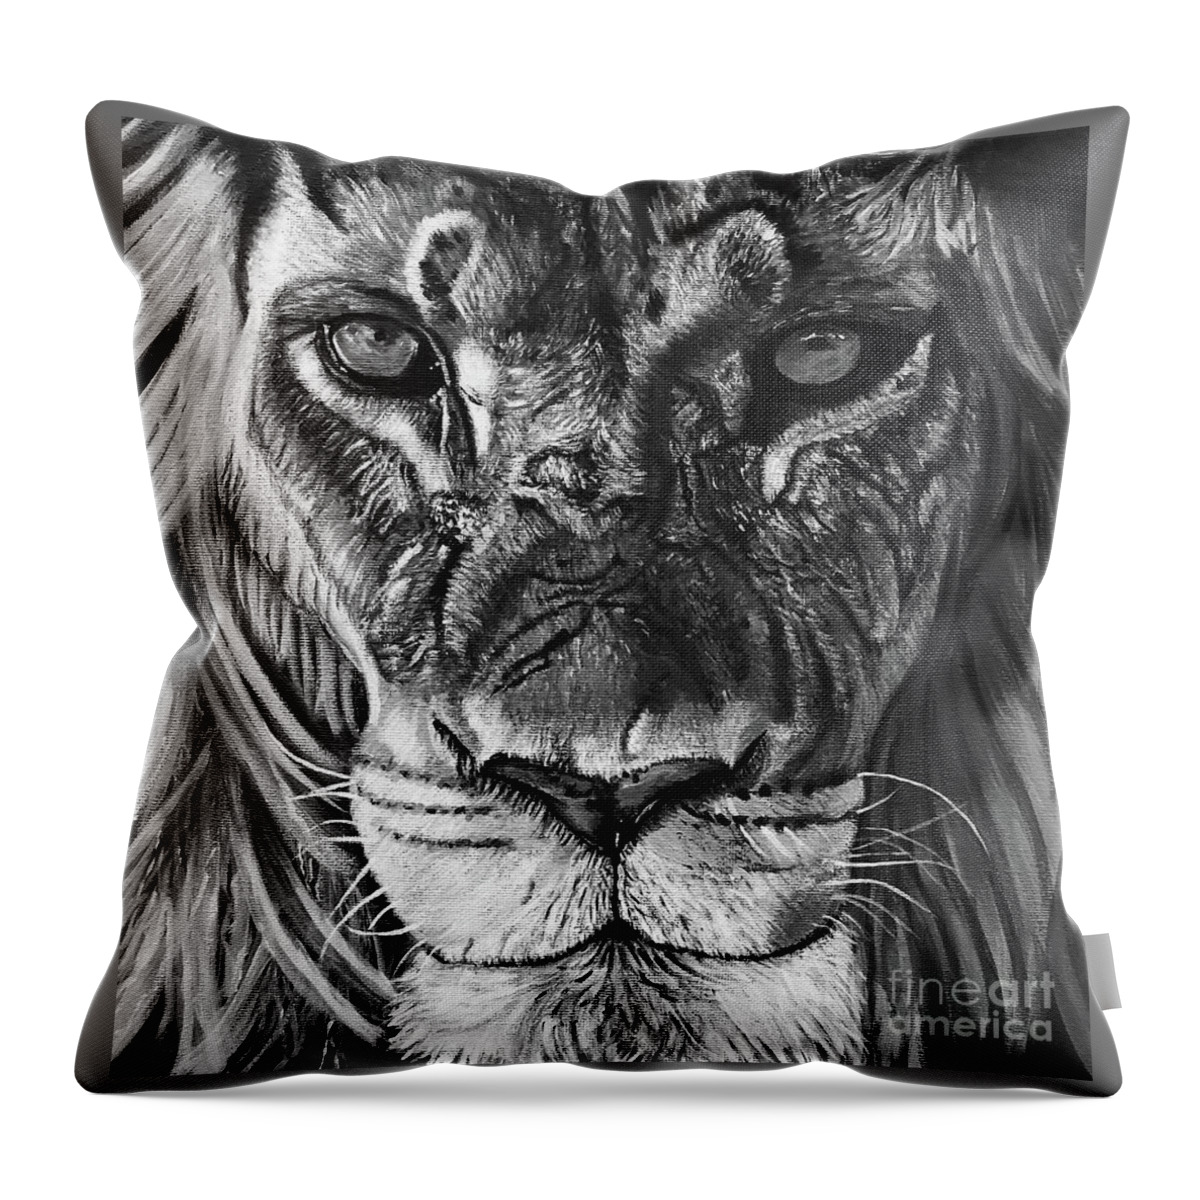 Lion Throw Pillow featuring the painting The Boss by Melissa Galvin